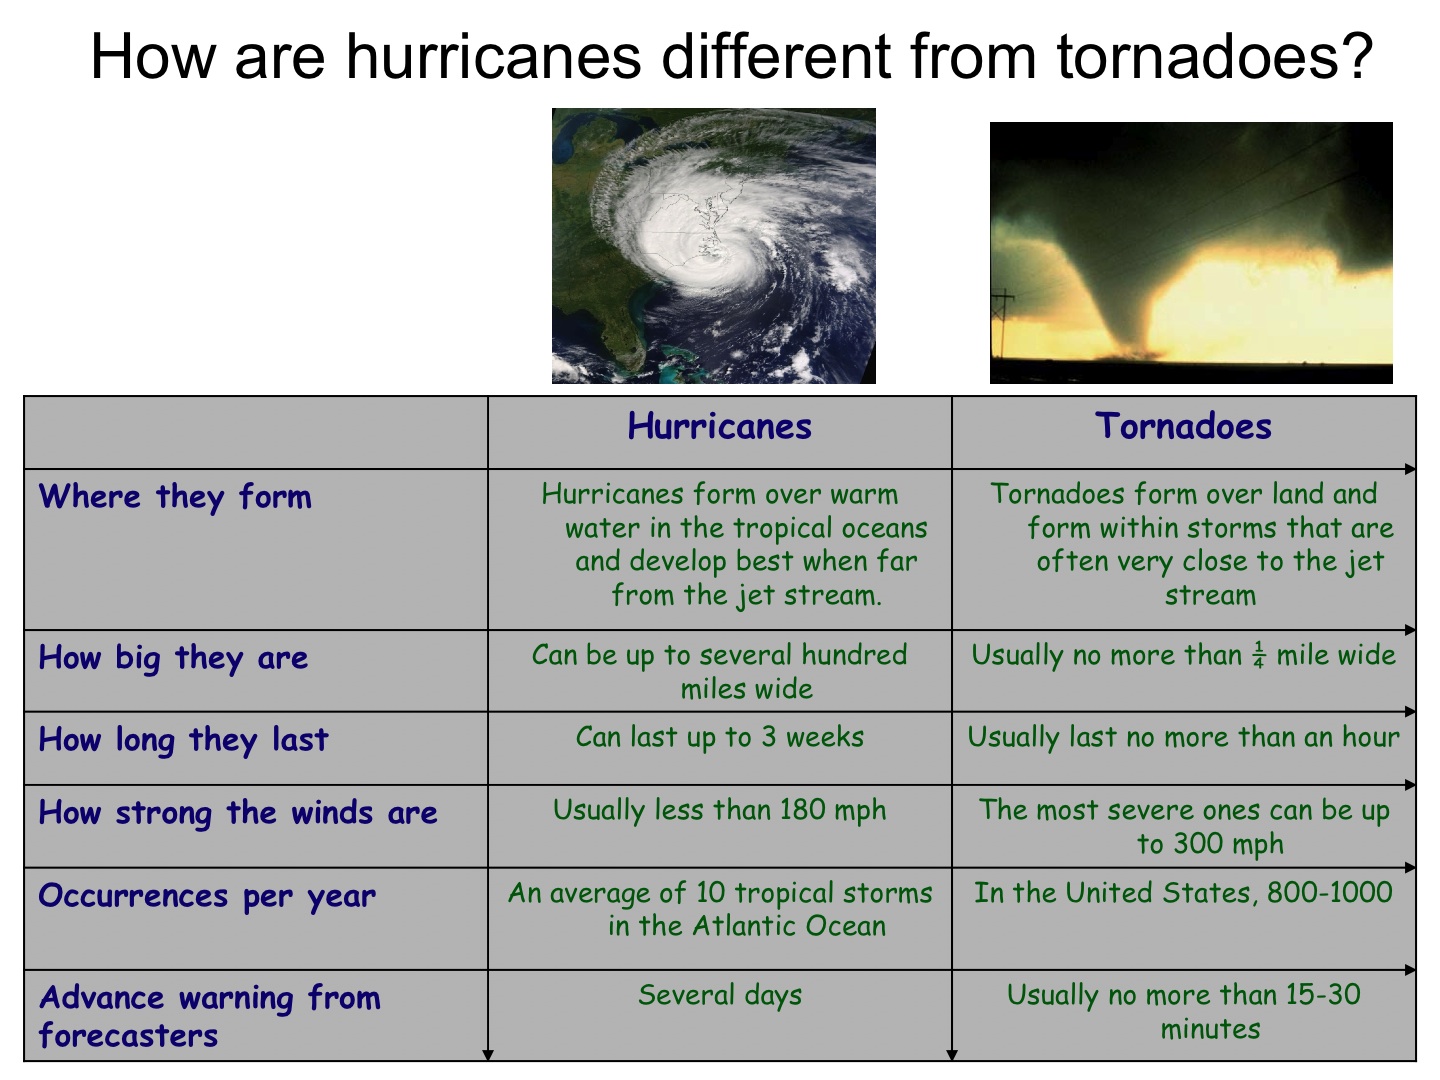 Table describing the differences between hurricanes and tornadoes.